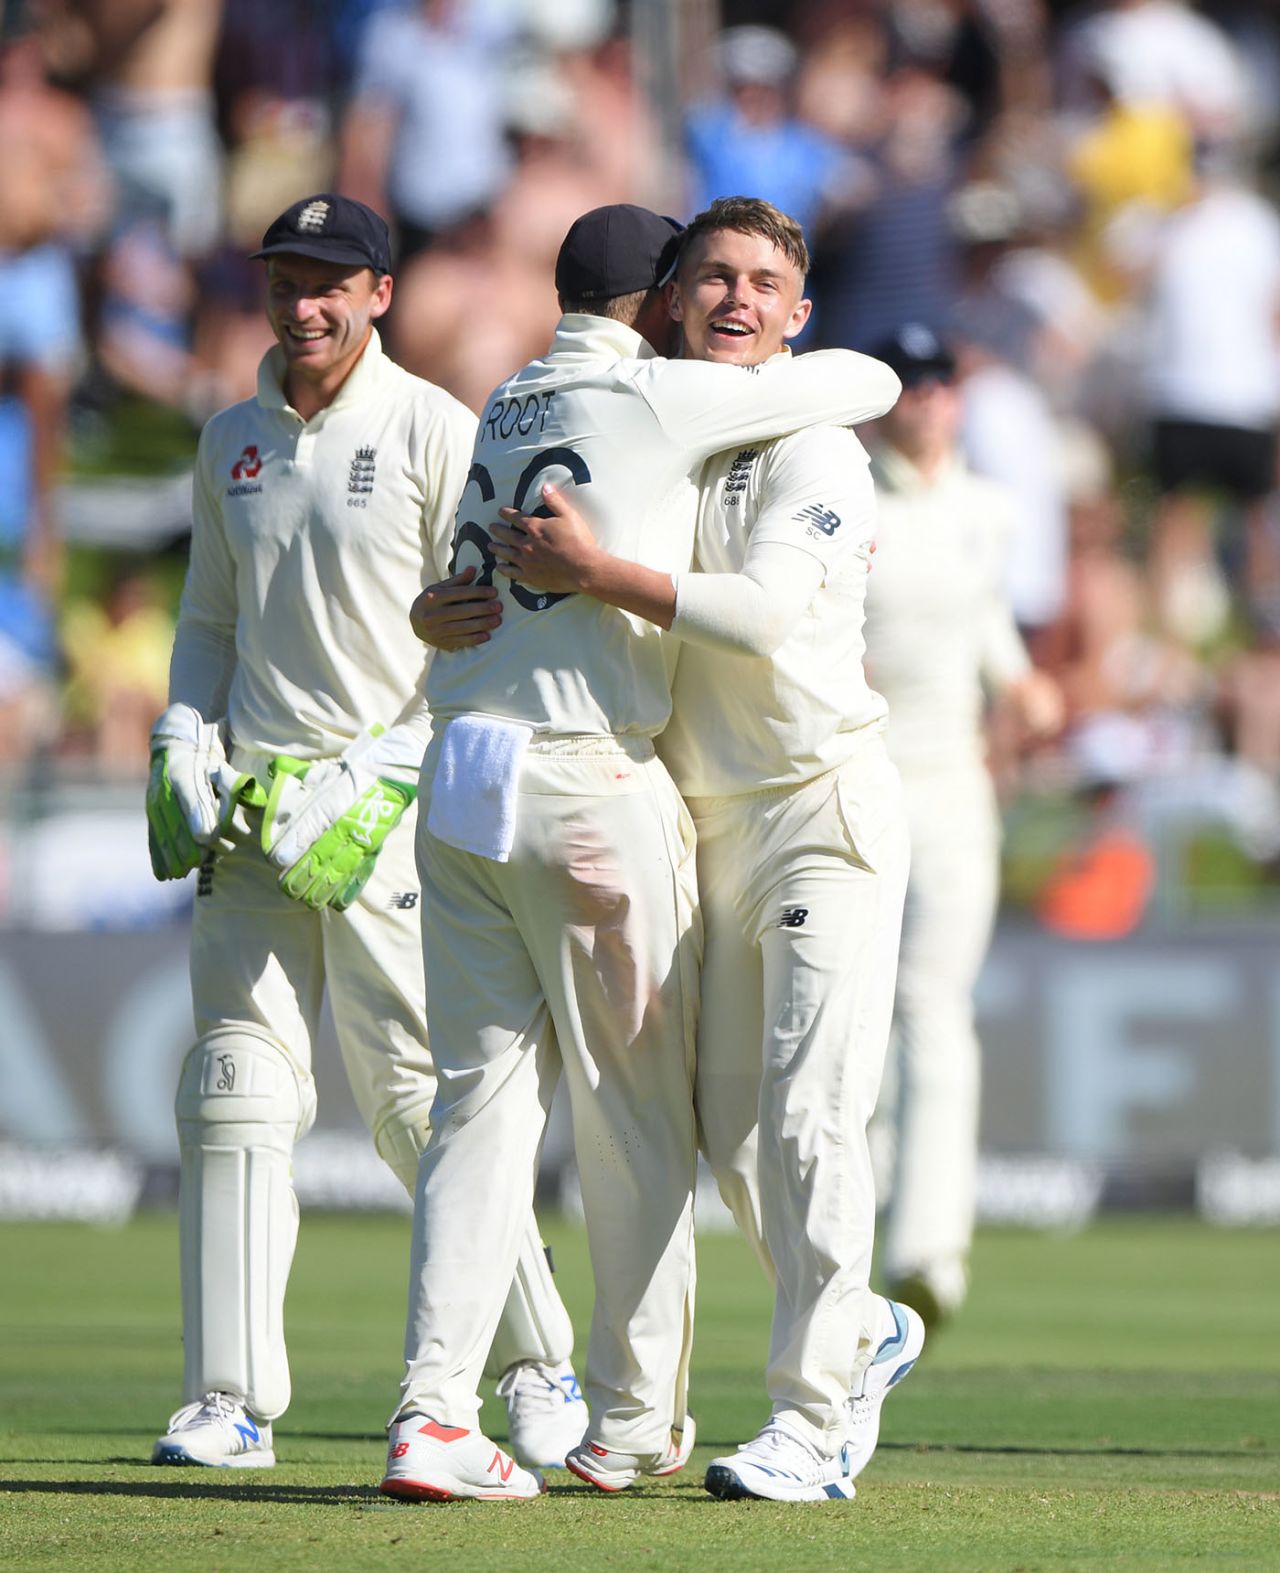 Sam Curran gets a hug from his captain, South Africa v England, 2nd Test, Cape Town, 2nd day, January 4, 2020